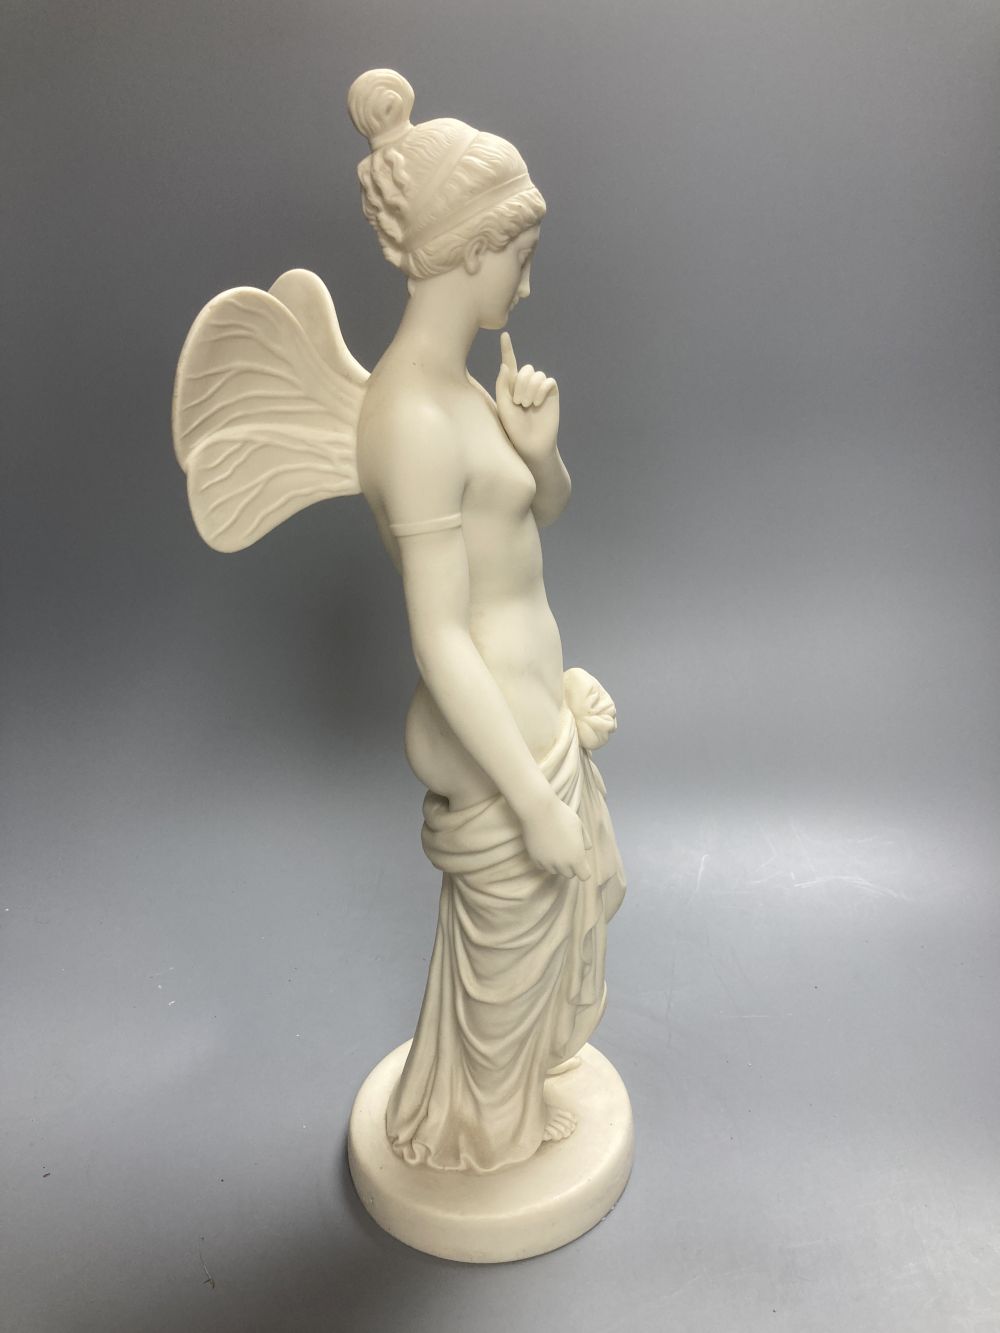 A Copeland Parian figure of a winged maiden and a later composition figure of Venus bathing, H 43cm